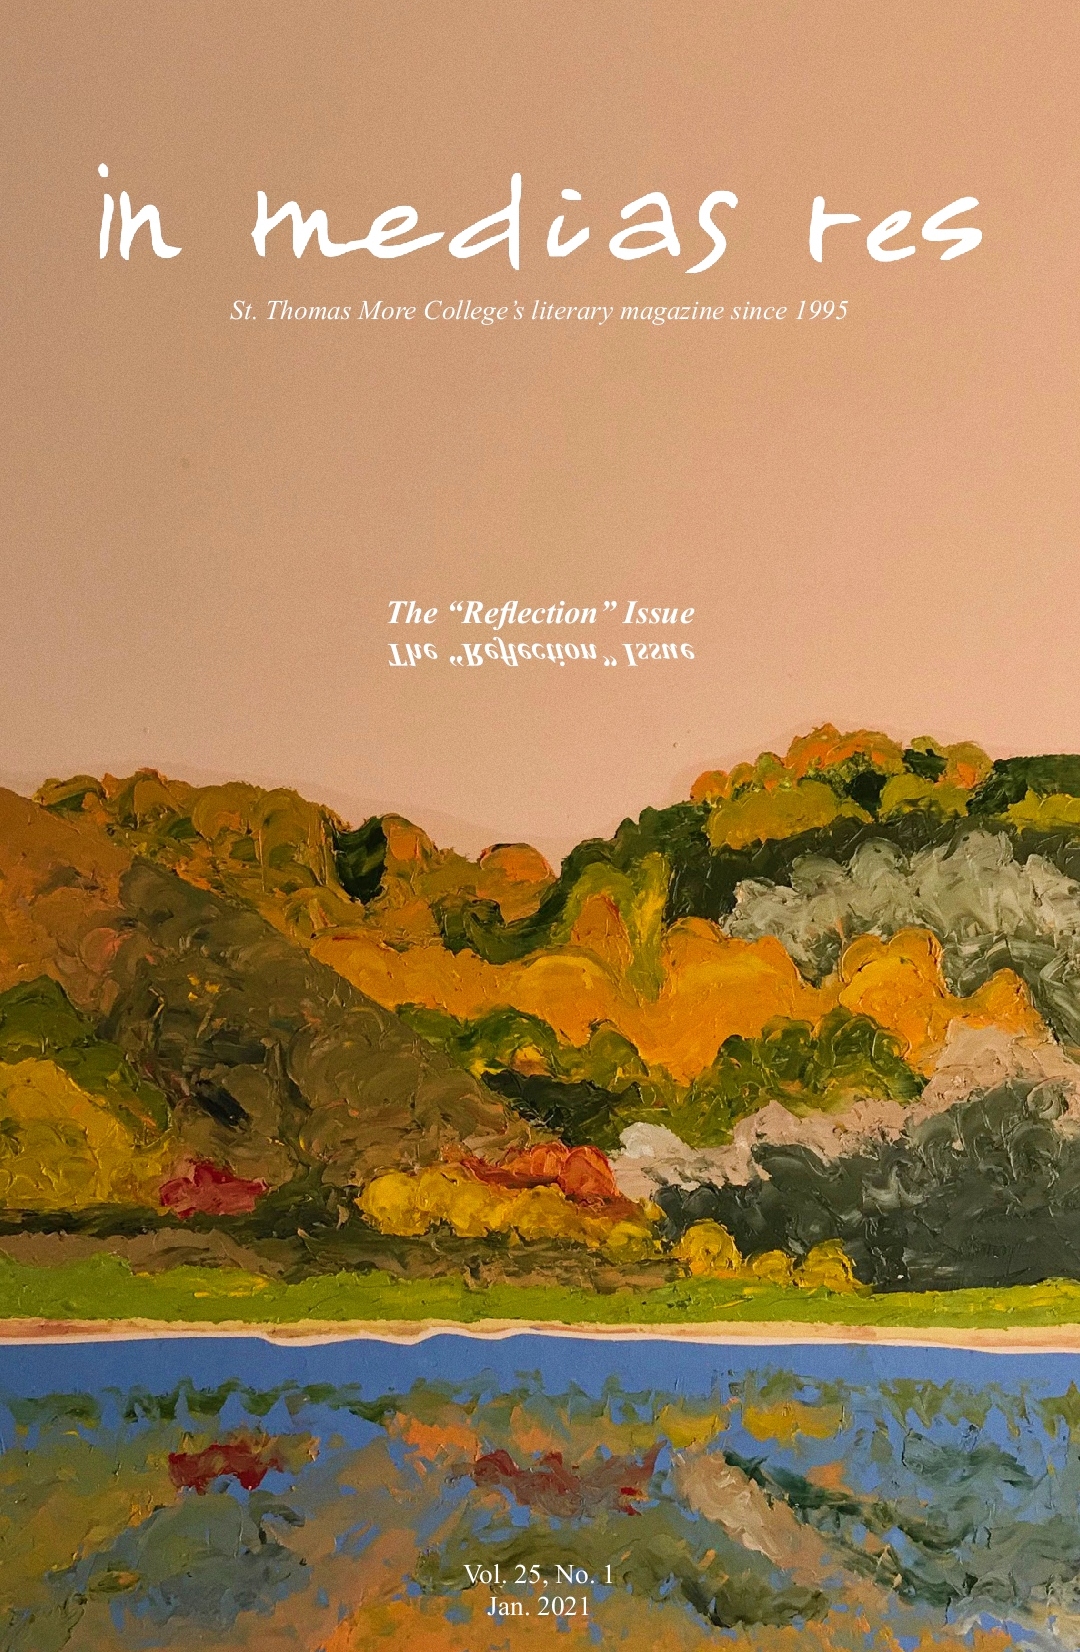 The cover of The "Reflection" Issue. The cover srt is a beautiful orange-toned painting of mountains over a lake that reflects them. The text says in medias res, St. Thomas More College's literary magazine since 1995. Volume 25, Number 1. January 2021.